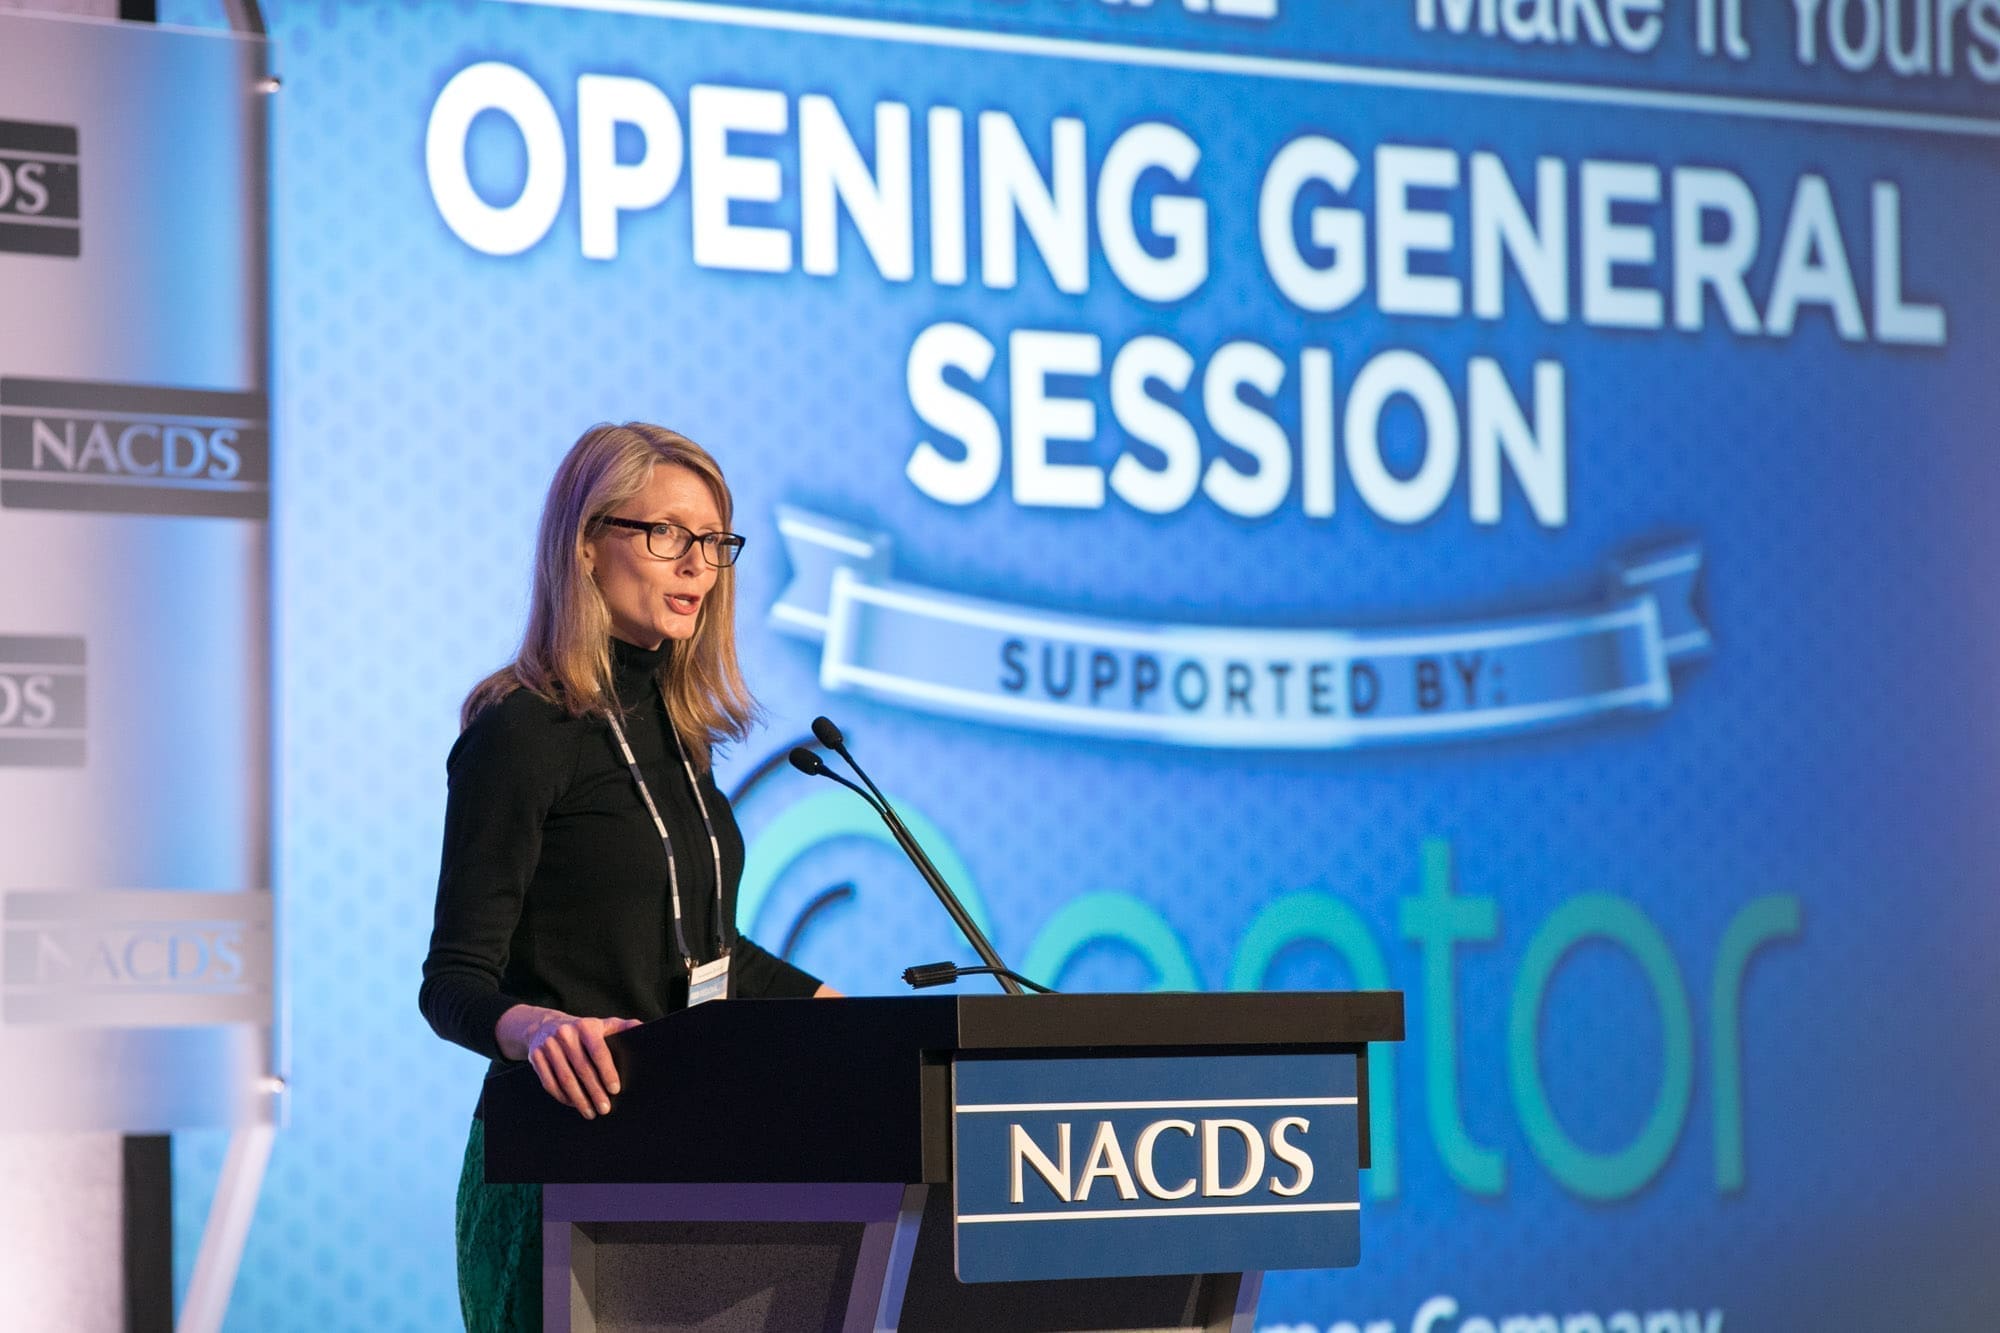 Kristin Williams, senior vice president and chief health officer of Hy-Vee, Inc., and NACDS Regional Chain Conference chair, delivered remarks this morning during the Opening General Session of the NACDS Regional Chain Conference in Palm Beach, Fla.